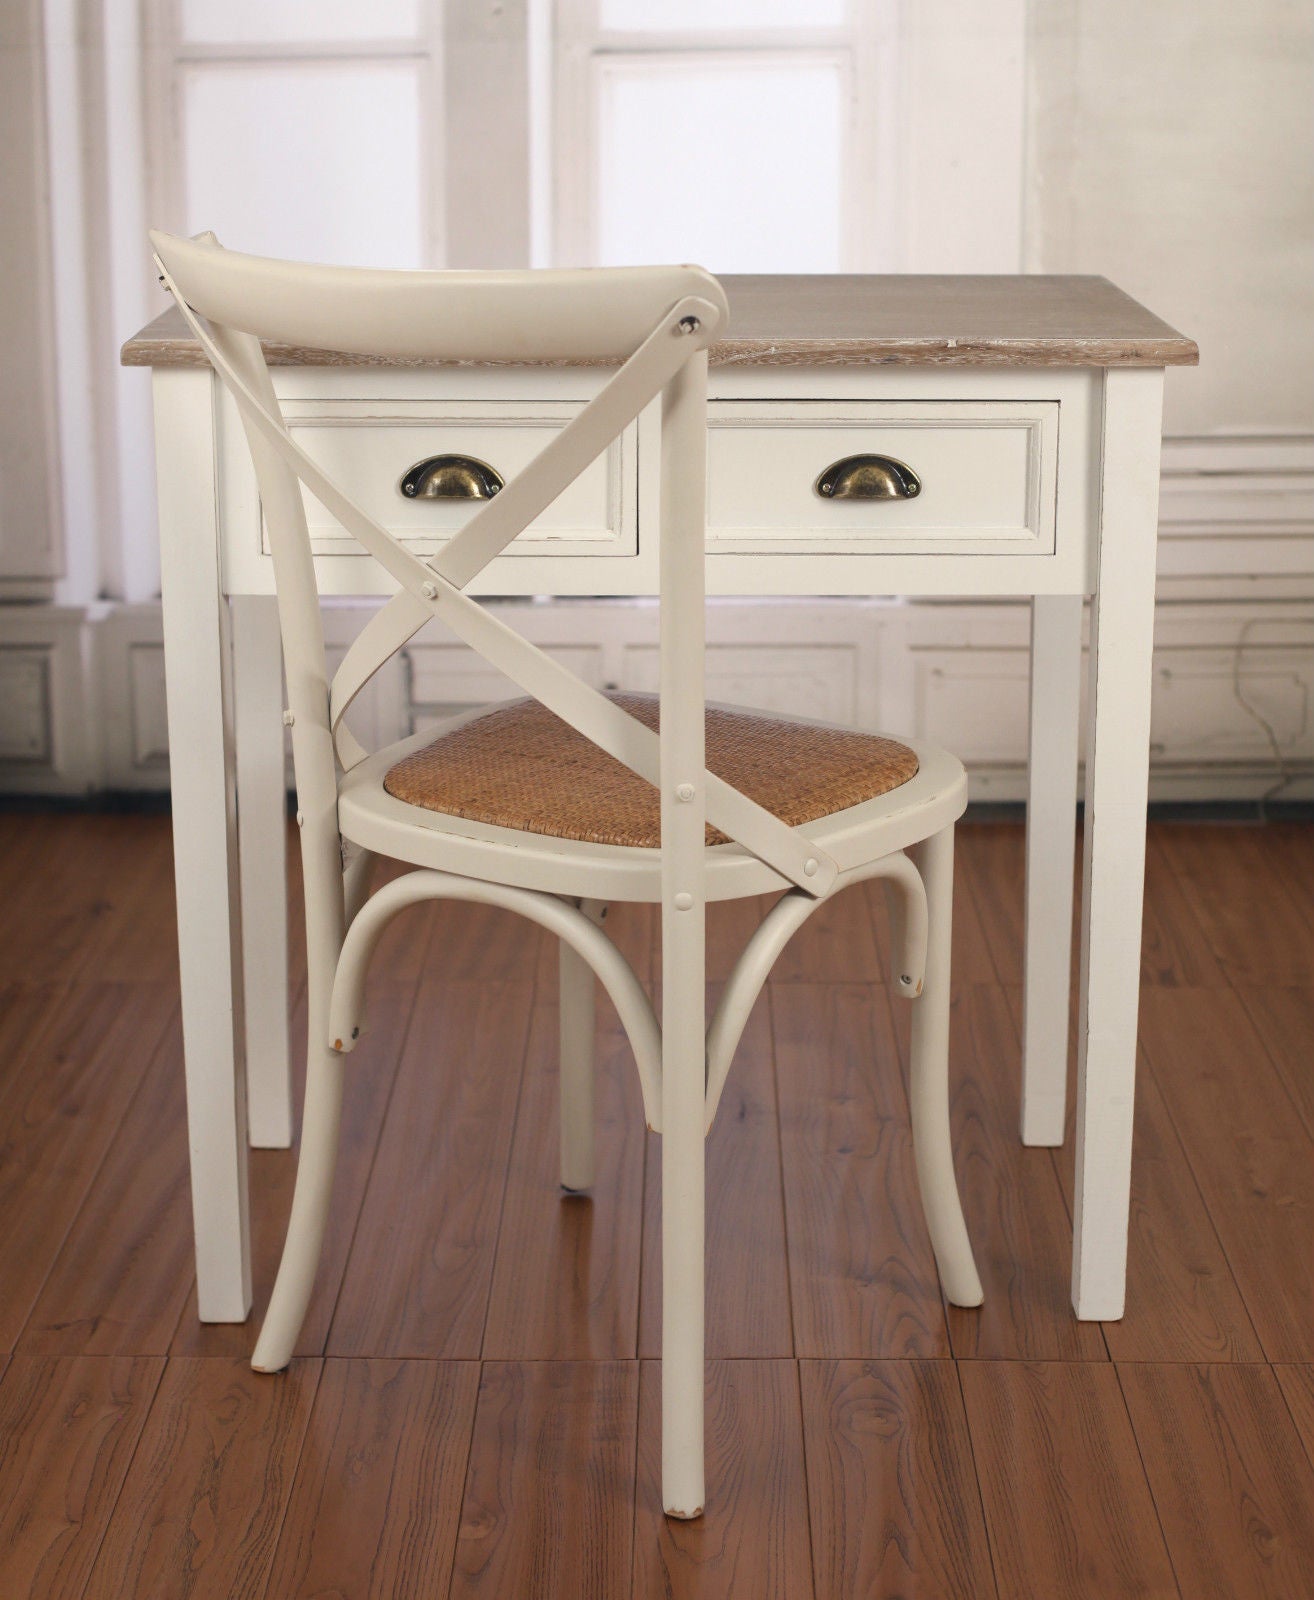 French Provincial Desk Chair Combo Sofa Table Antique White With